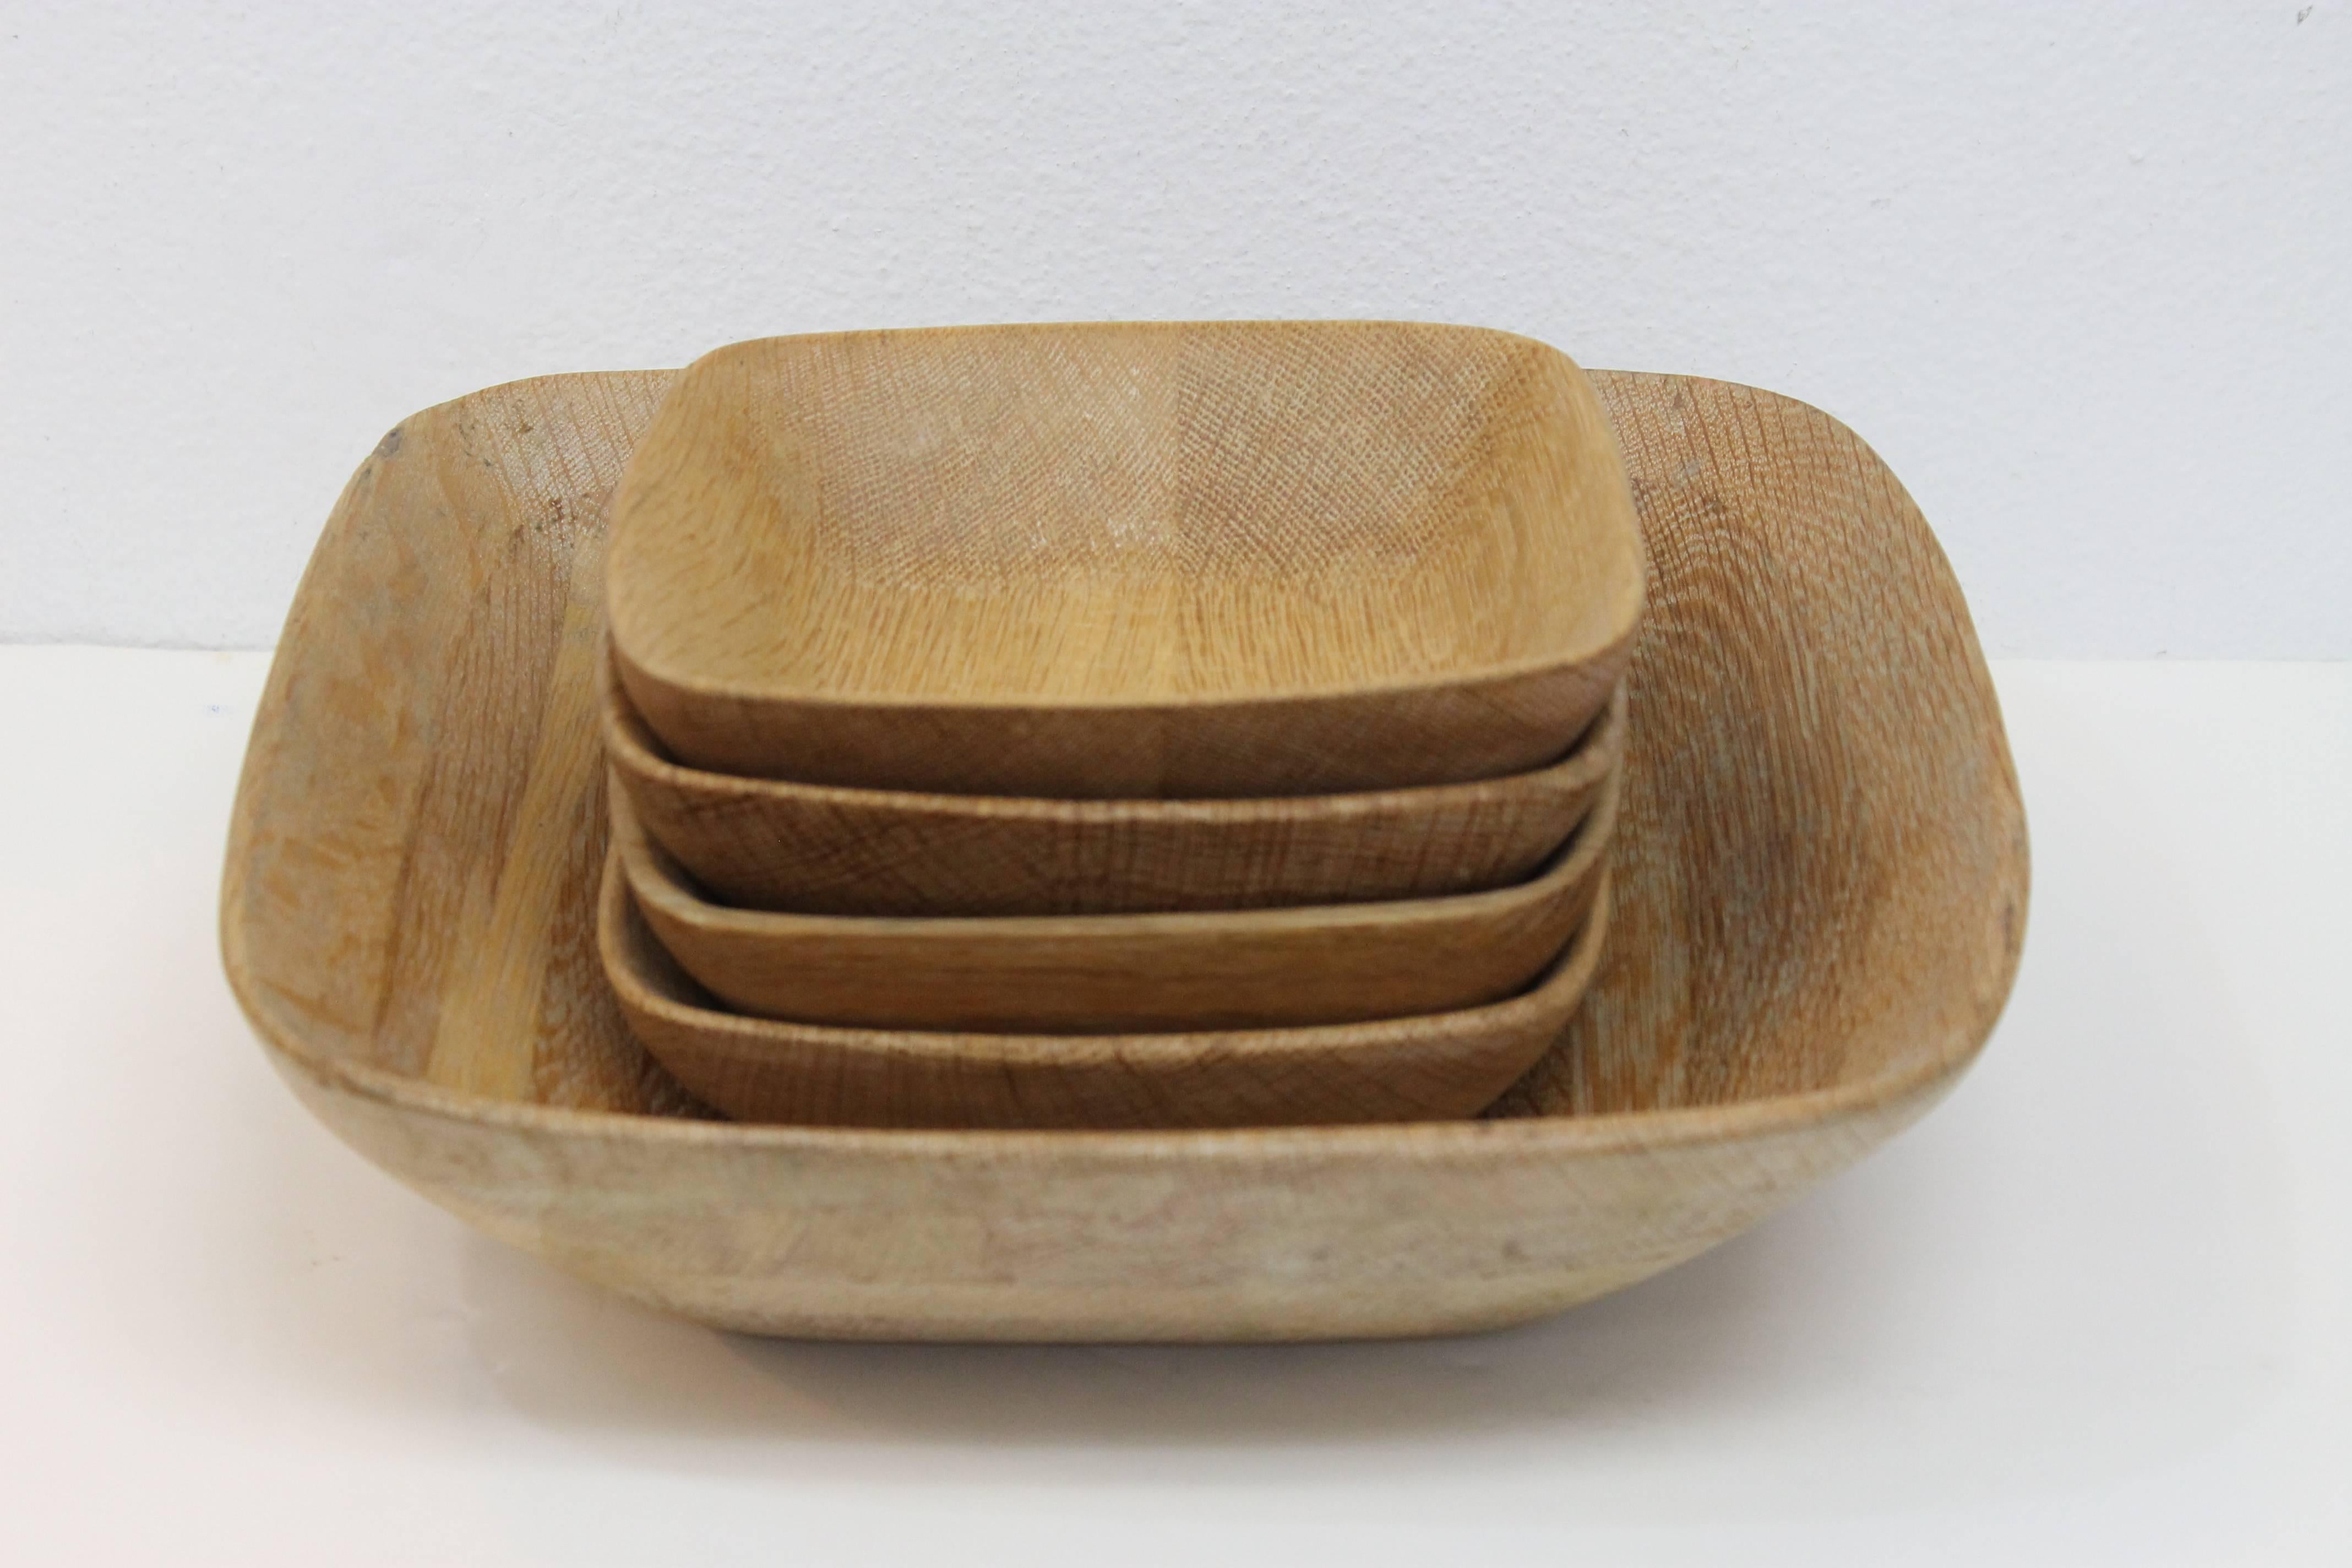 Mary Wright salad bowl set. Part of a wood line designed by husband and wife Industrial designers Russel Wright / Mary Wright. Large bowl measures 11.25